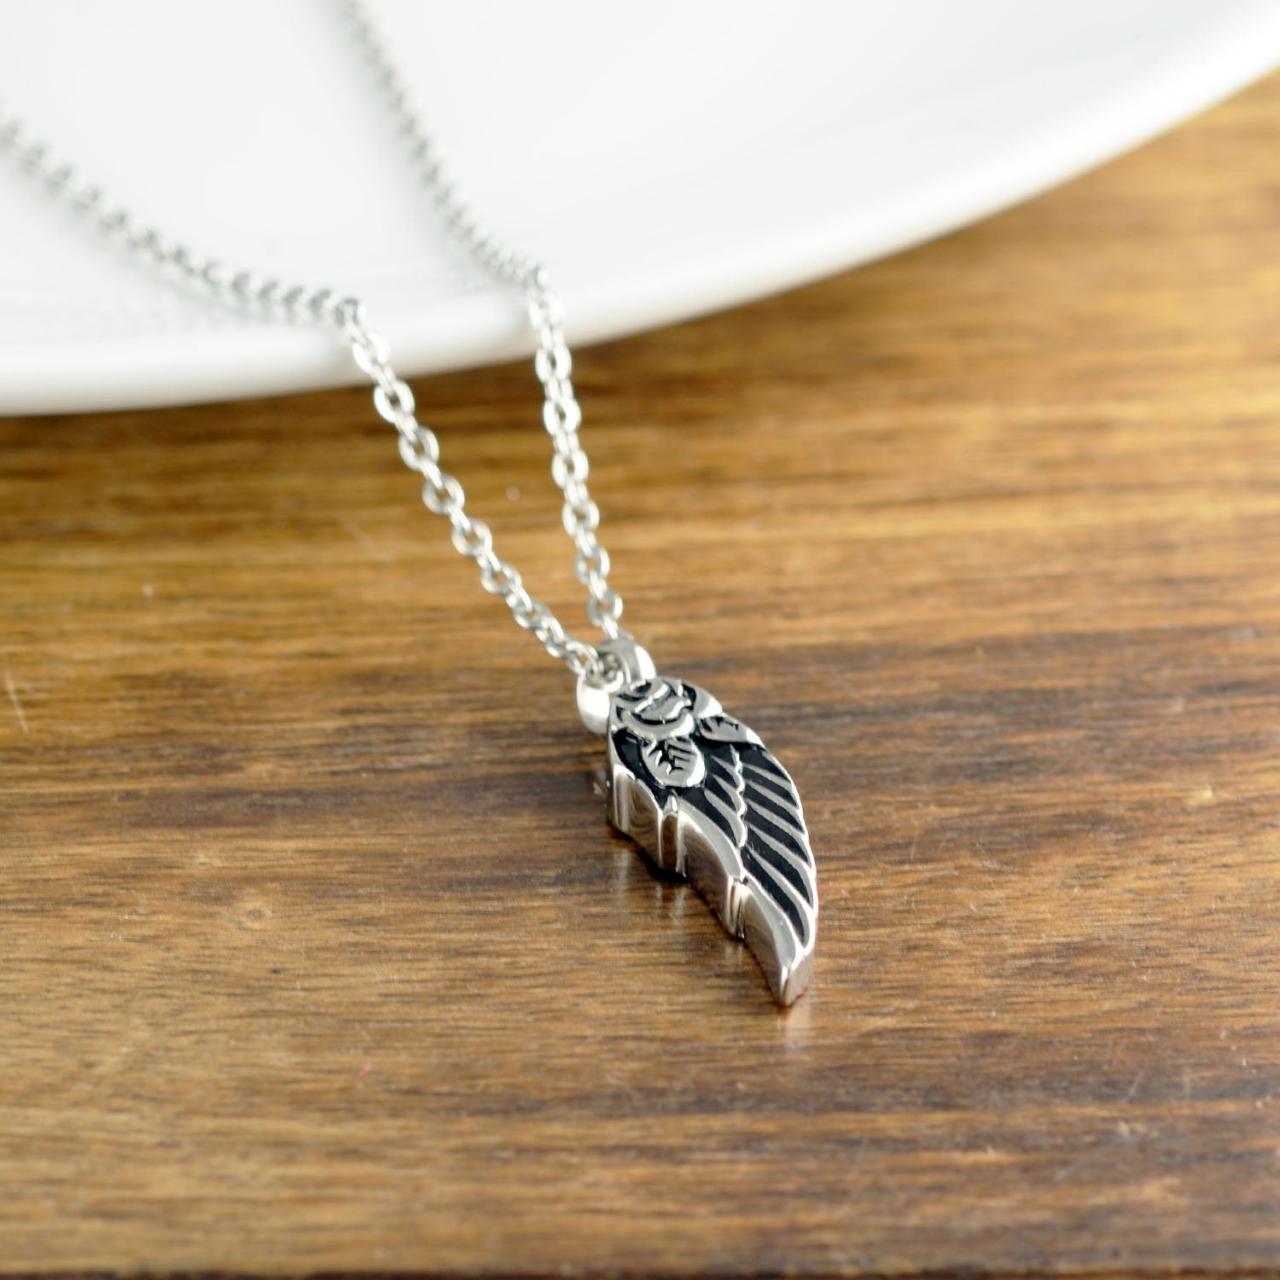 Angel Wing Necklace, Cremation Urn, Cremation Jewelry, Ash Jewelry, Cremation Pendant, Silver Wing Necklace, Cremation Necklace